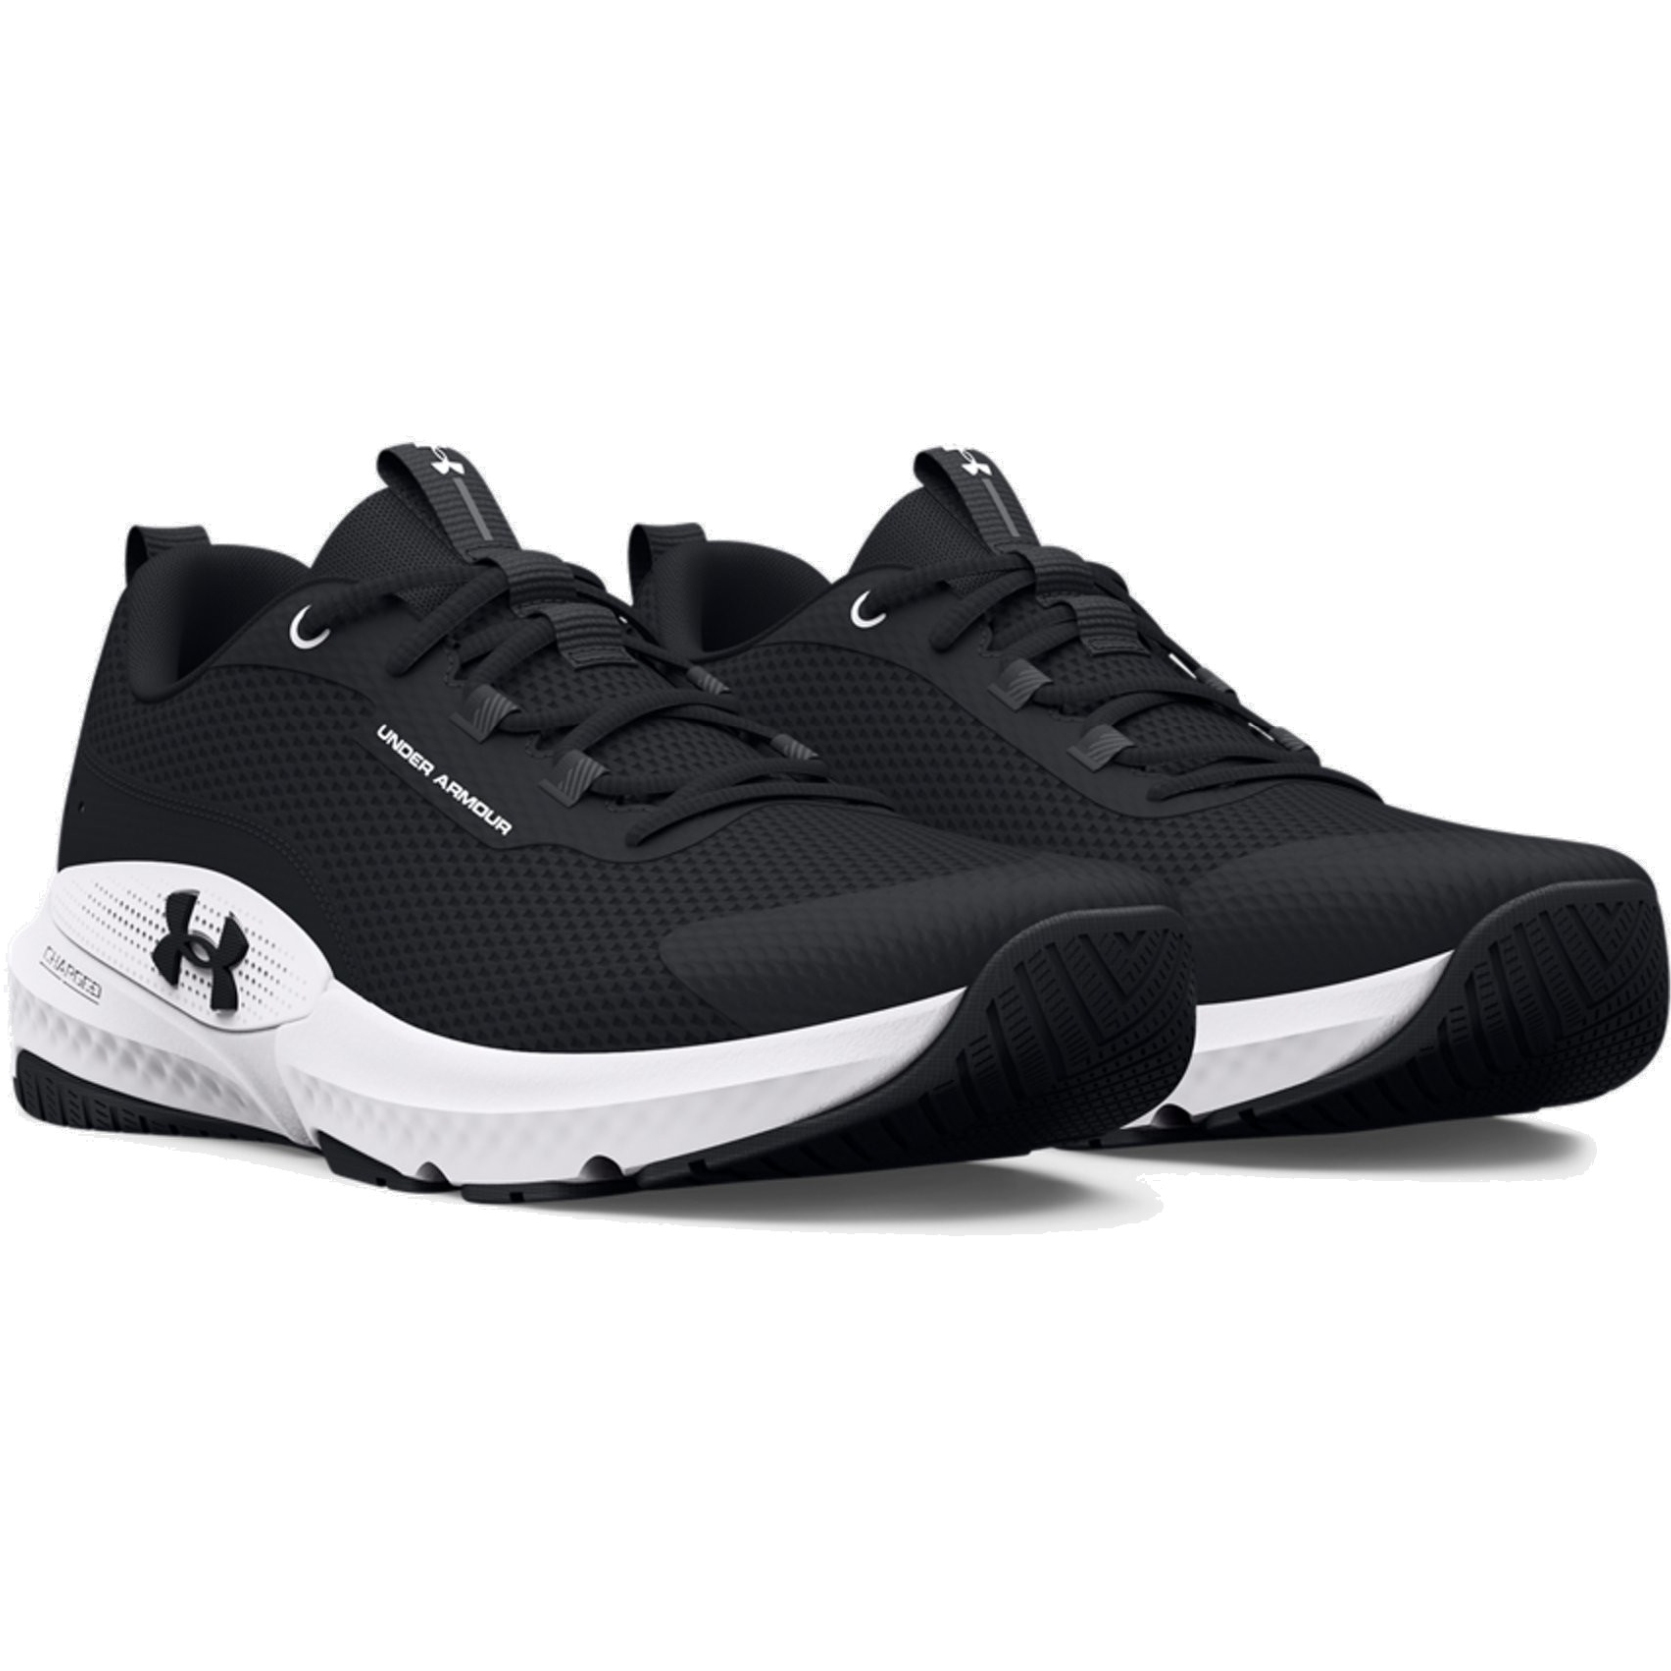 Picture of Under Armour UA Dynamic Select Training Shoes Women - Black/White/Black